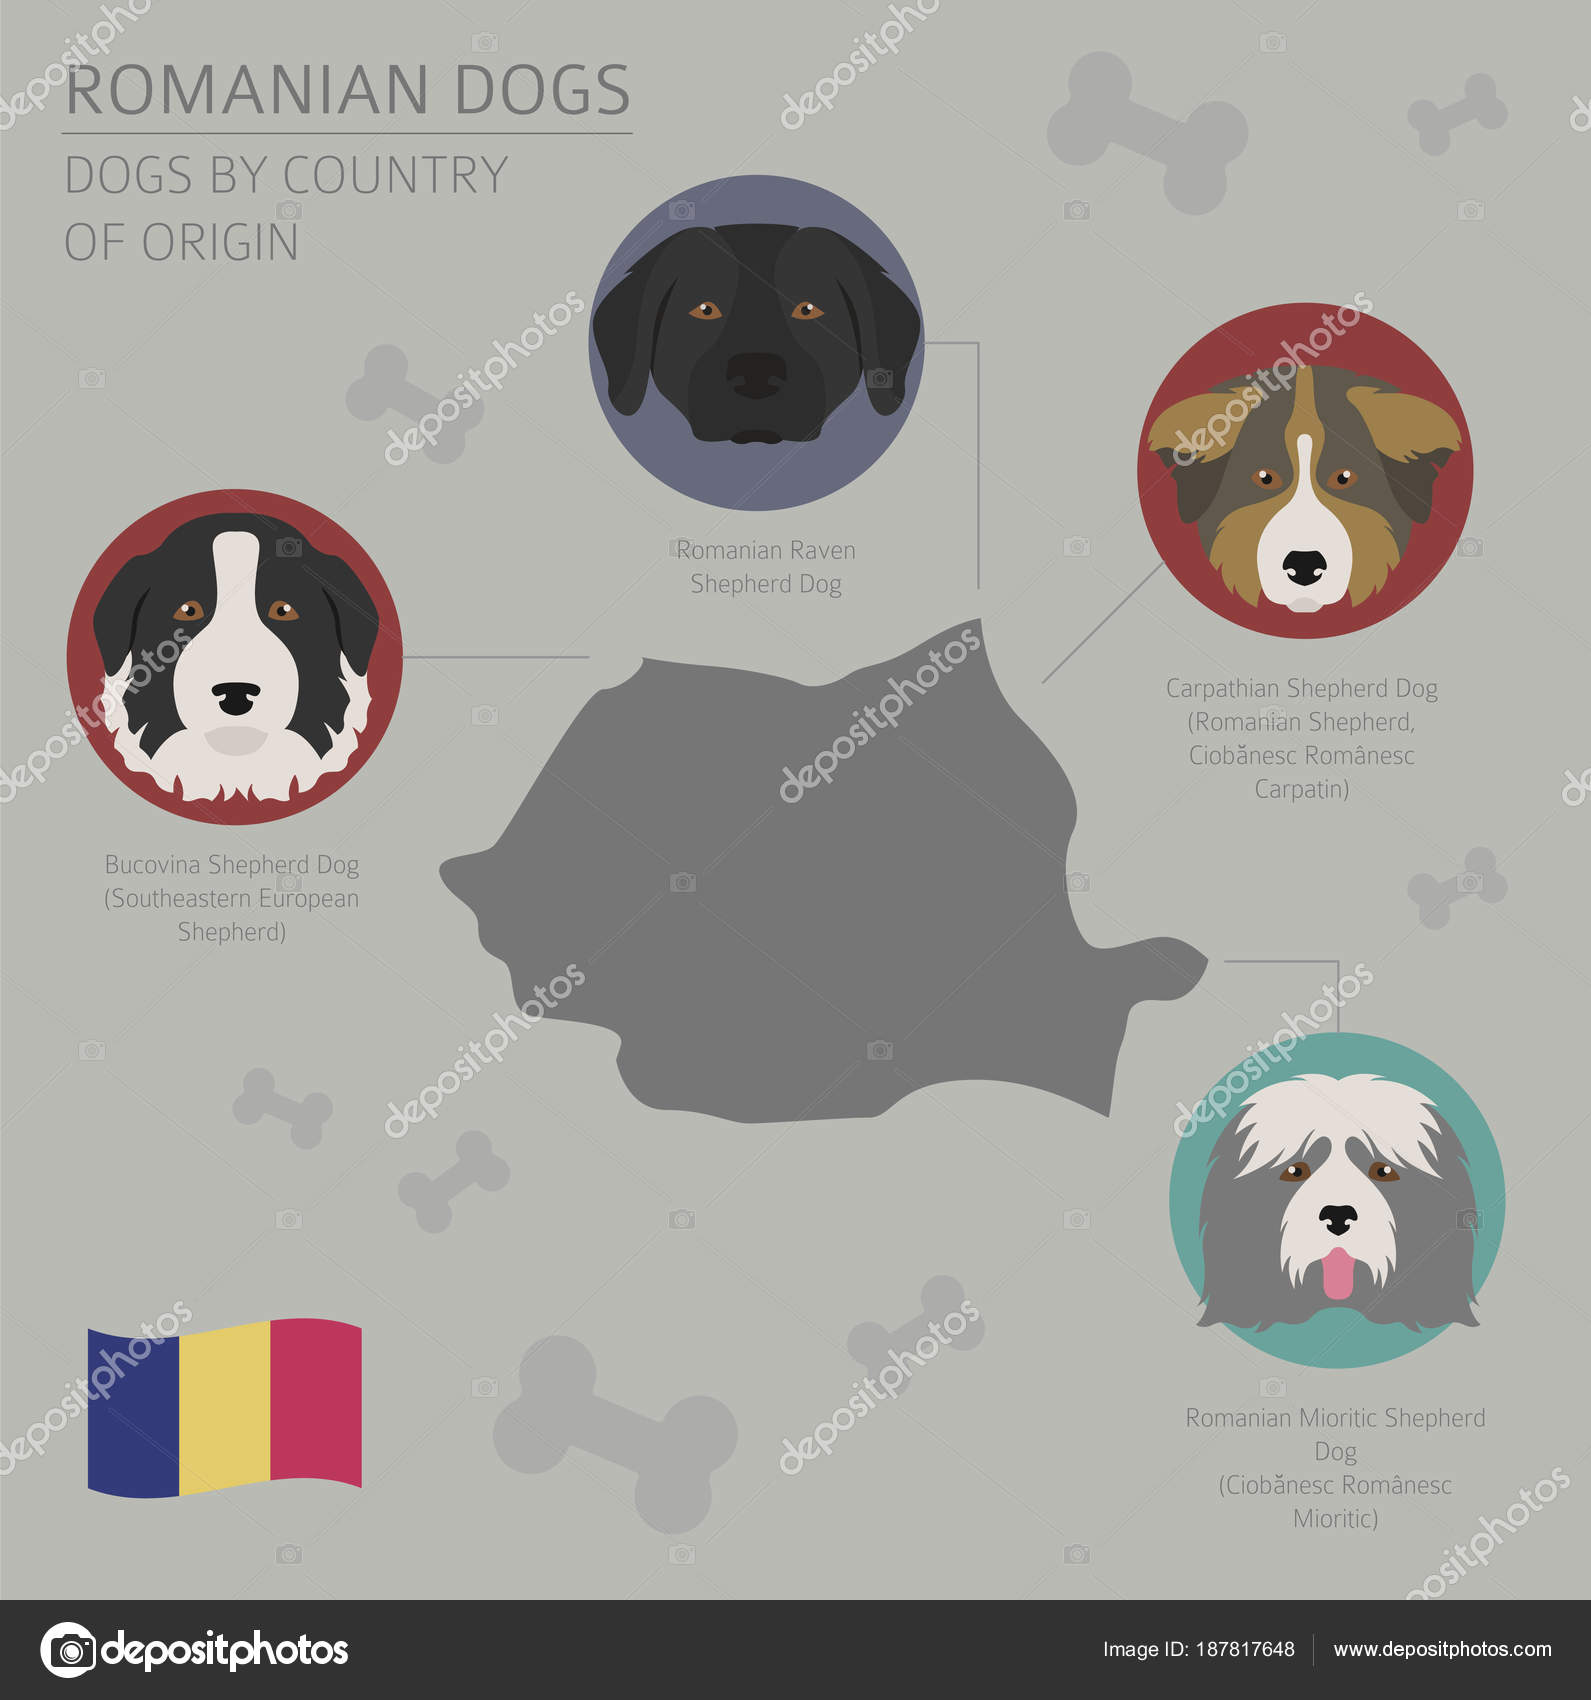 Dogs By Country Of Origin Romanian Dog Breeds Infographic Temp Stock Vector C A7880s 187817648